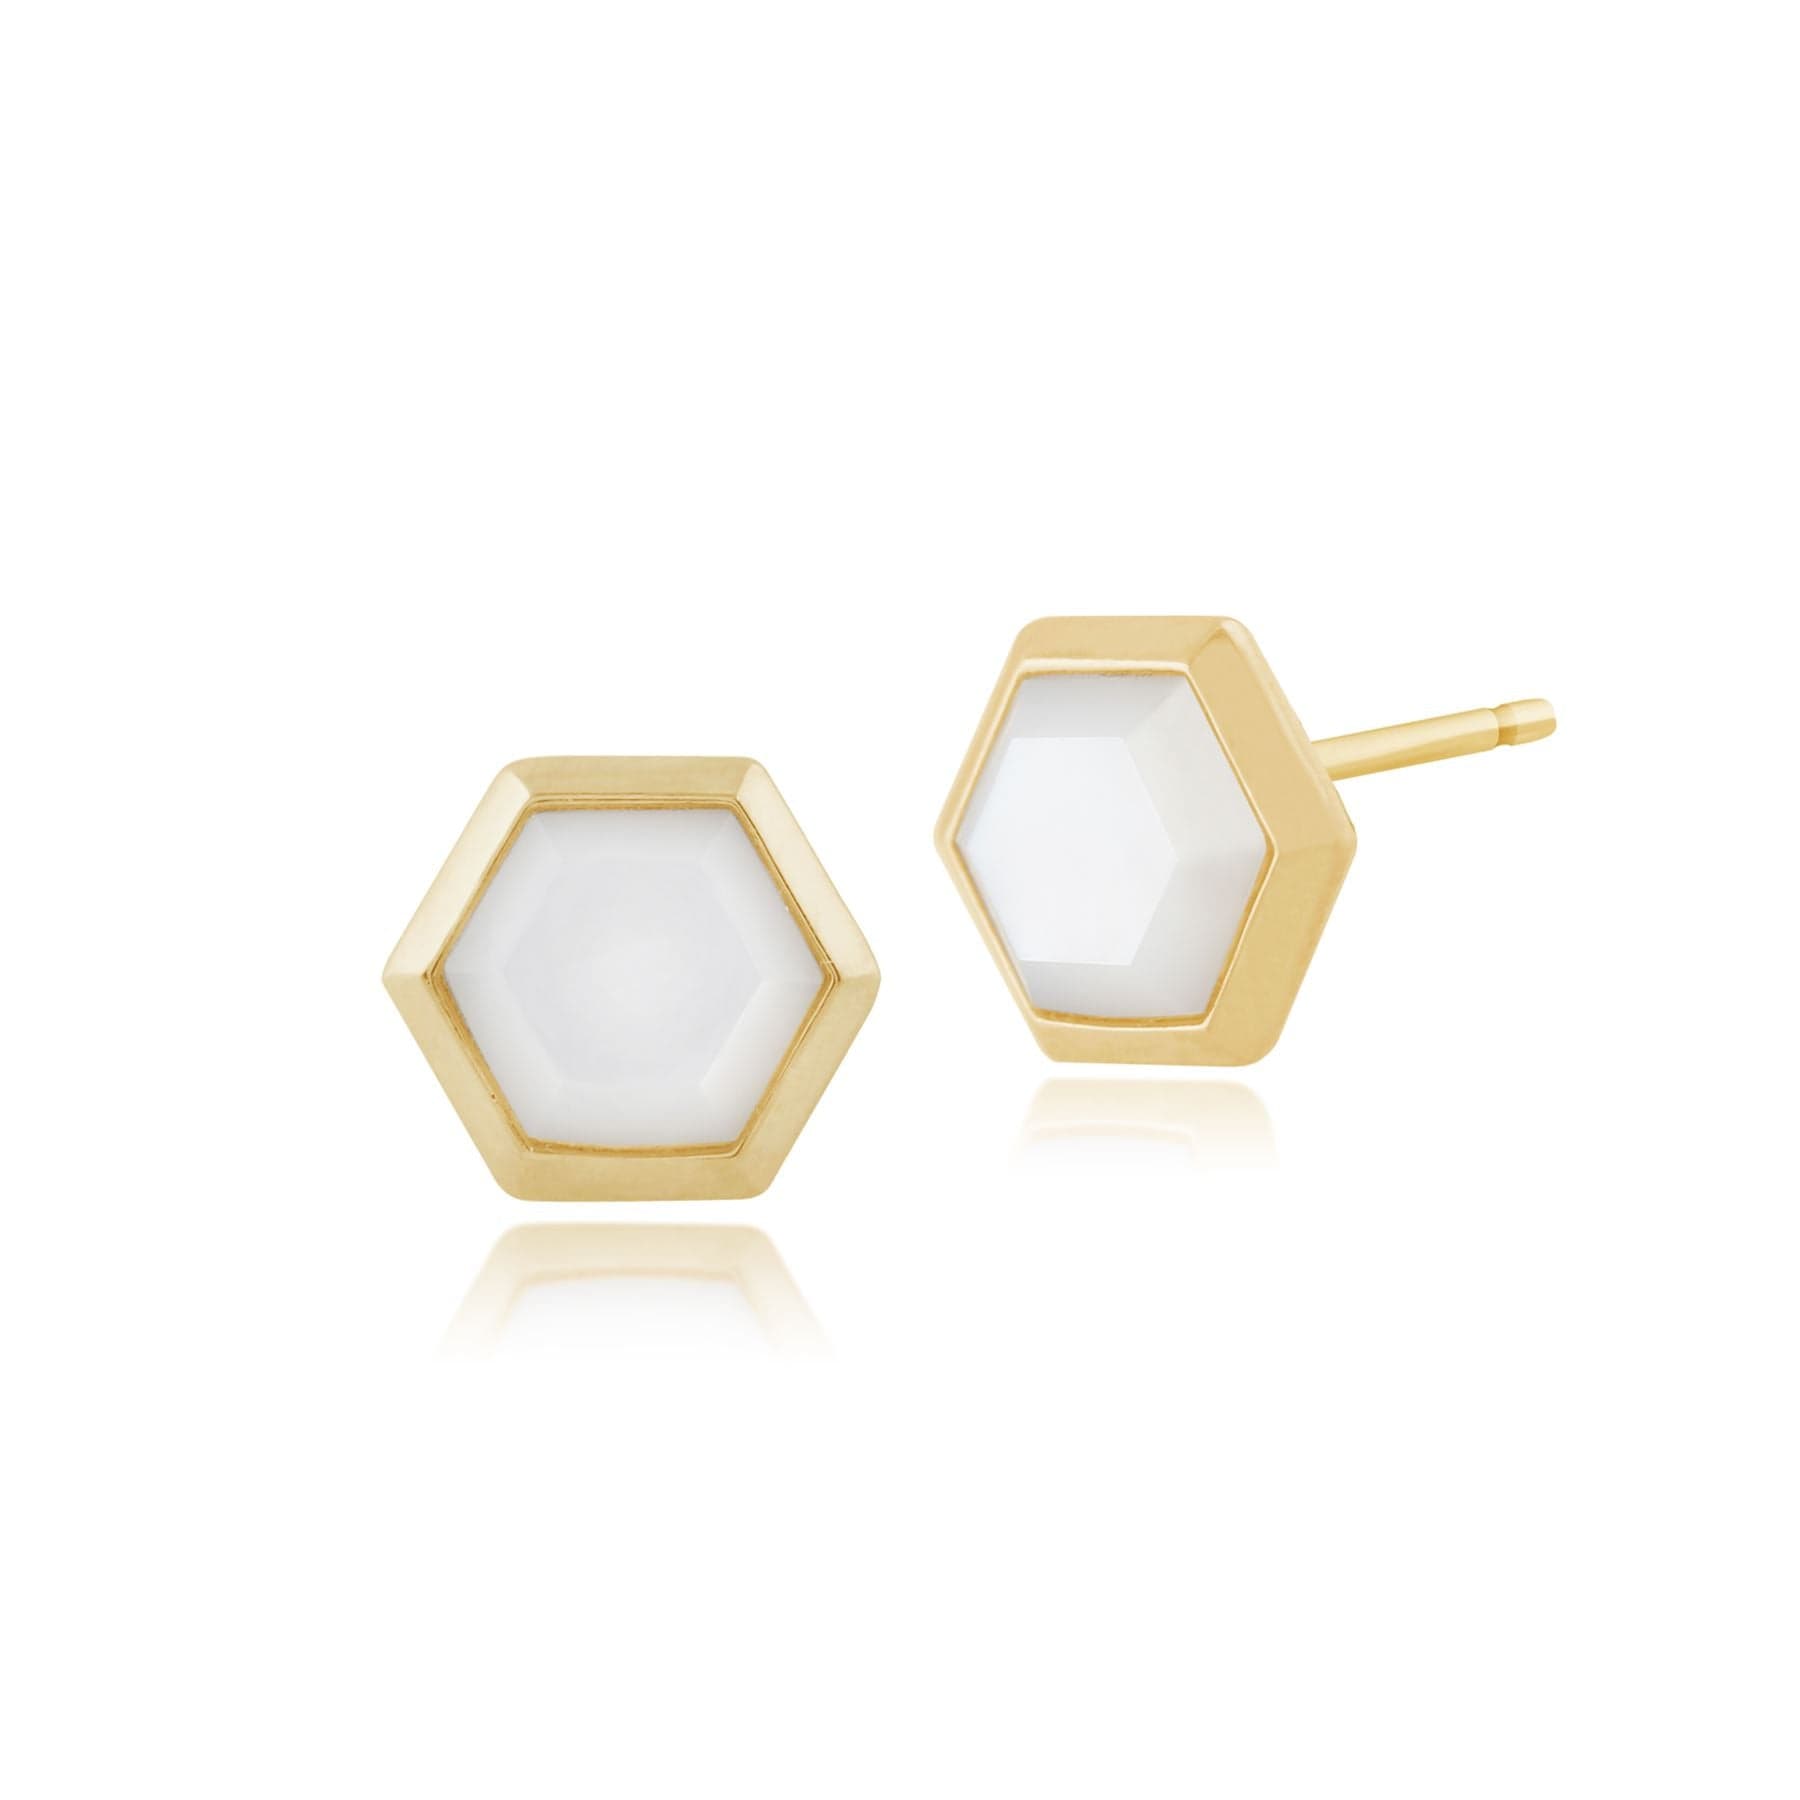 Geometric Mother of Pearl Prism Stud Earrings in Gold Plated 925 Sterling Silver - Gemondo